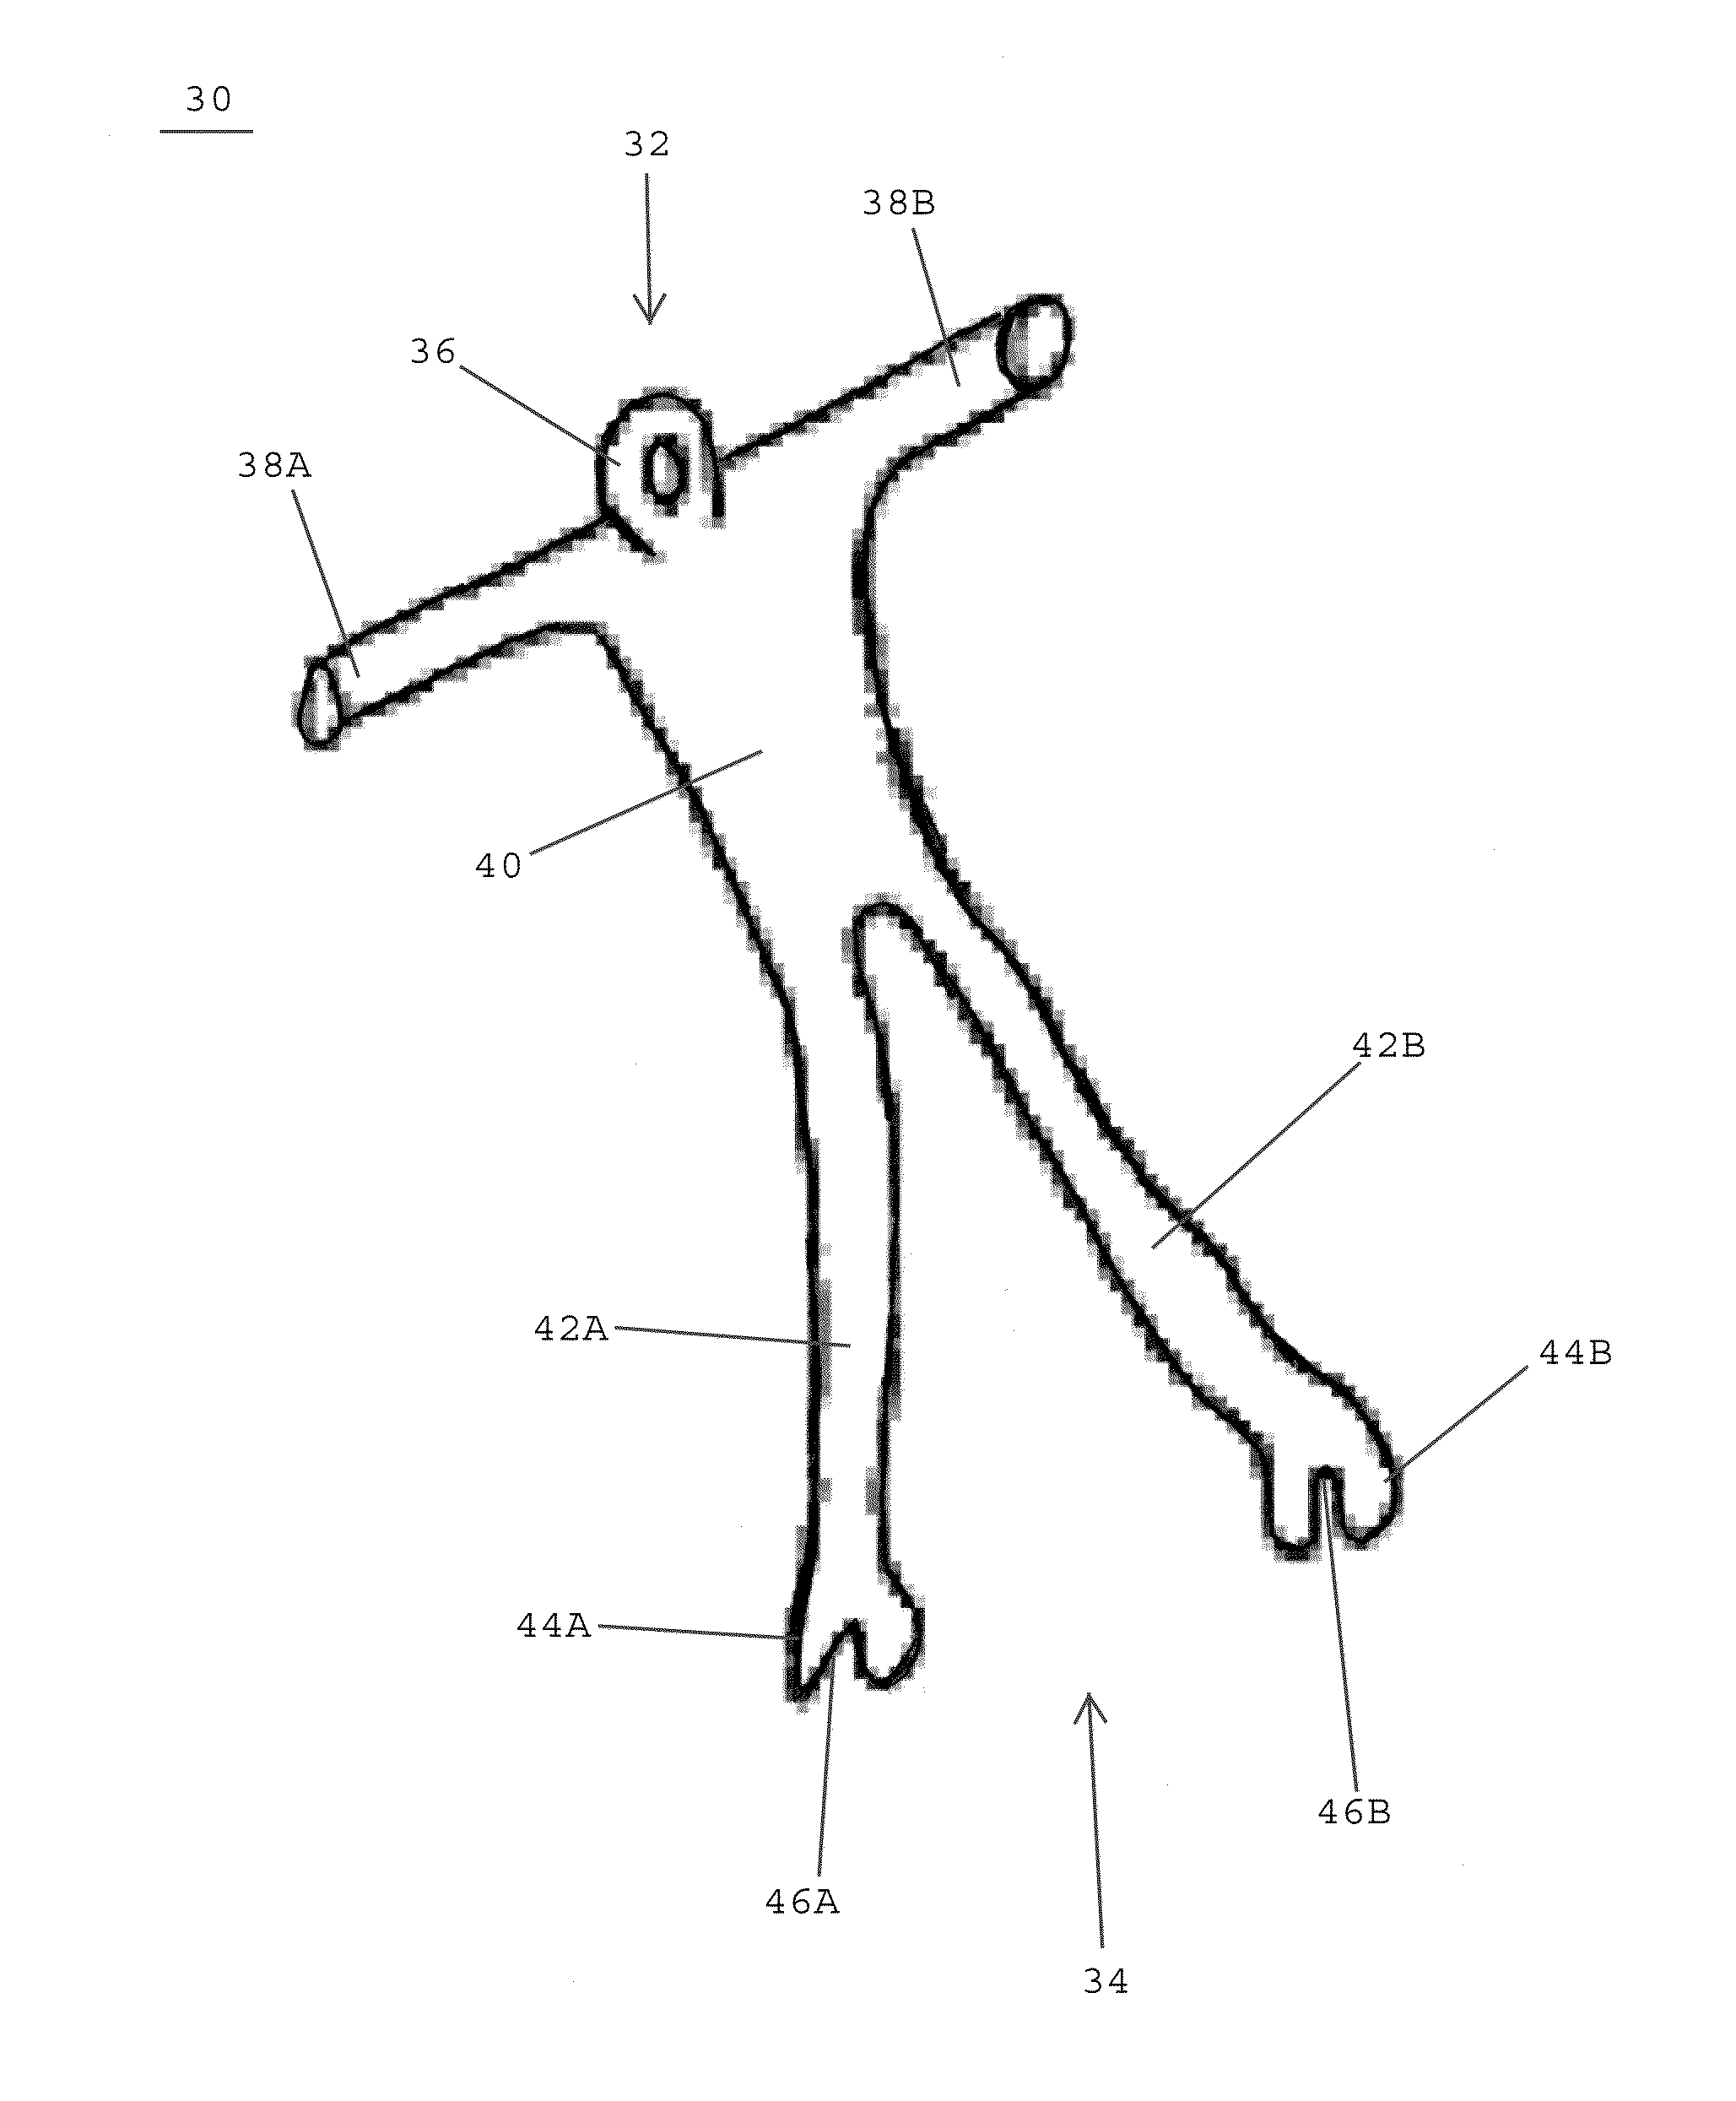 Tongue suspension system with hyoid-extender for treating obstructive sleep apnea